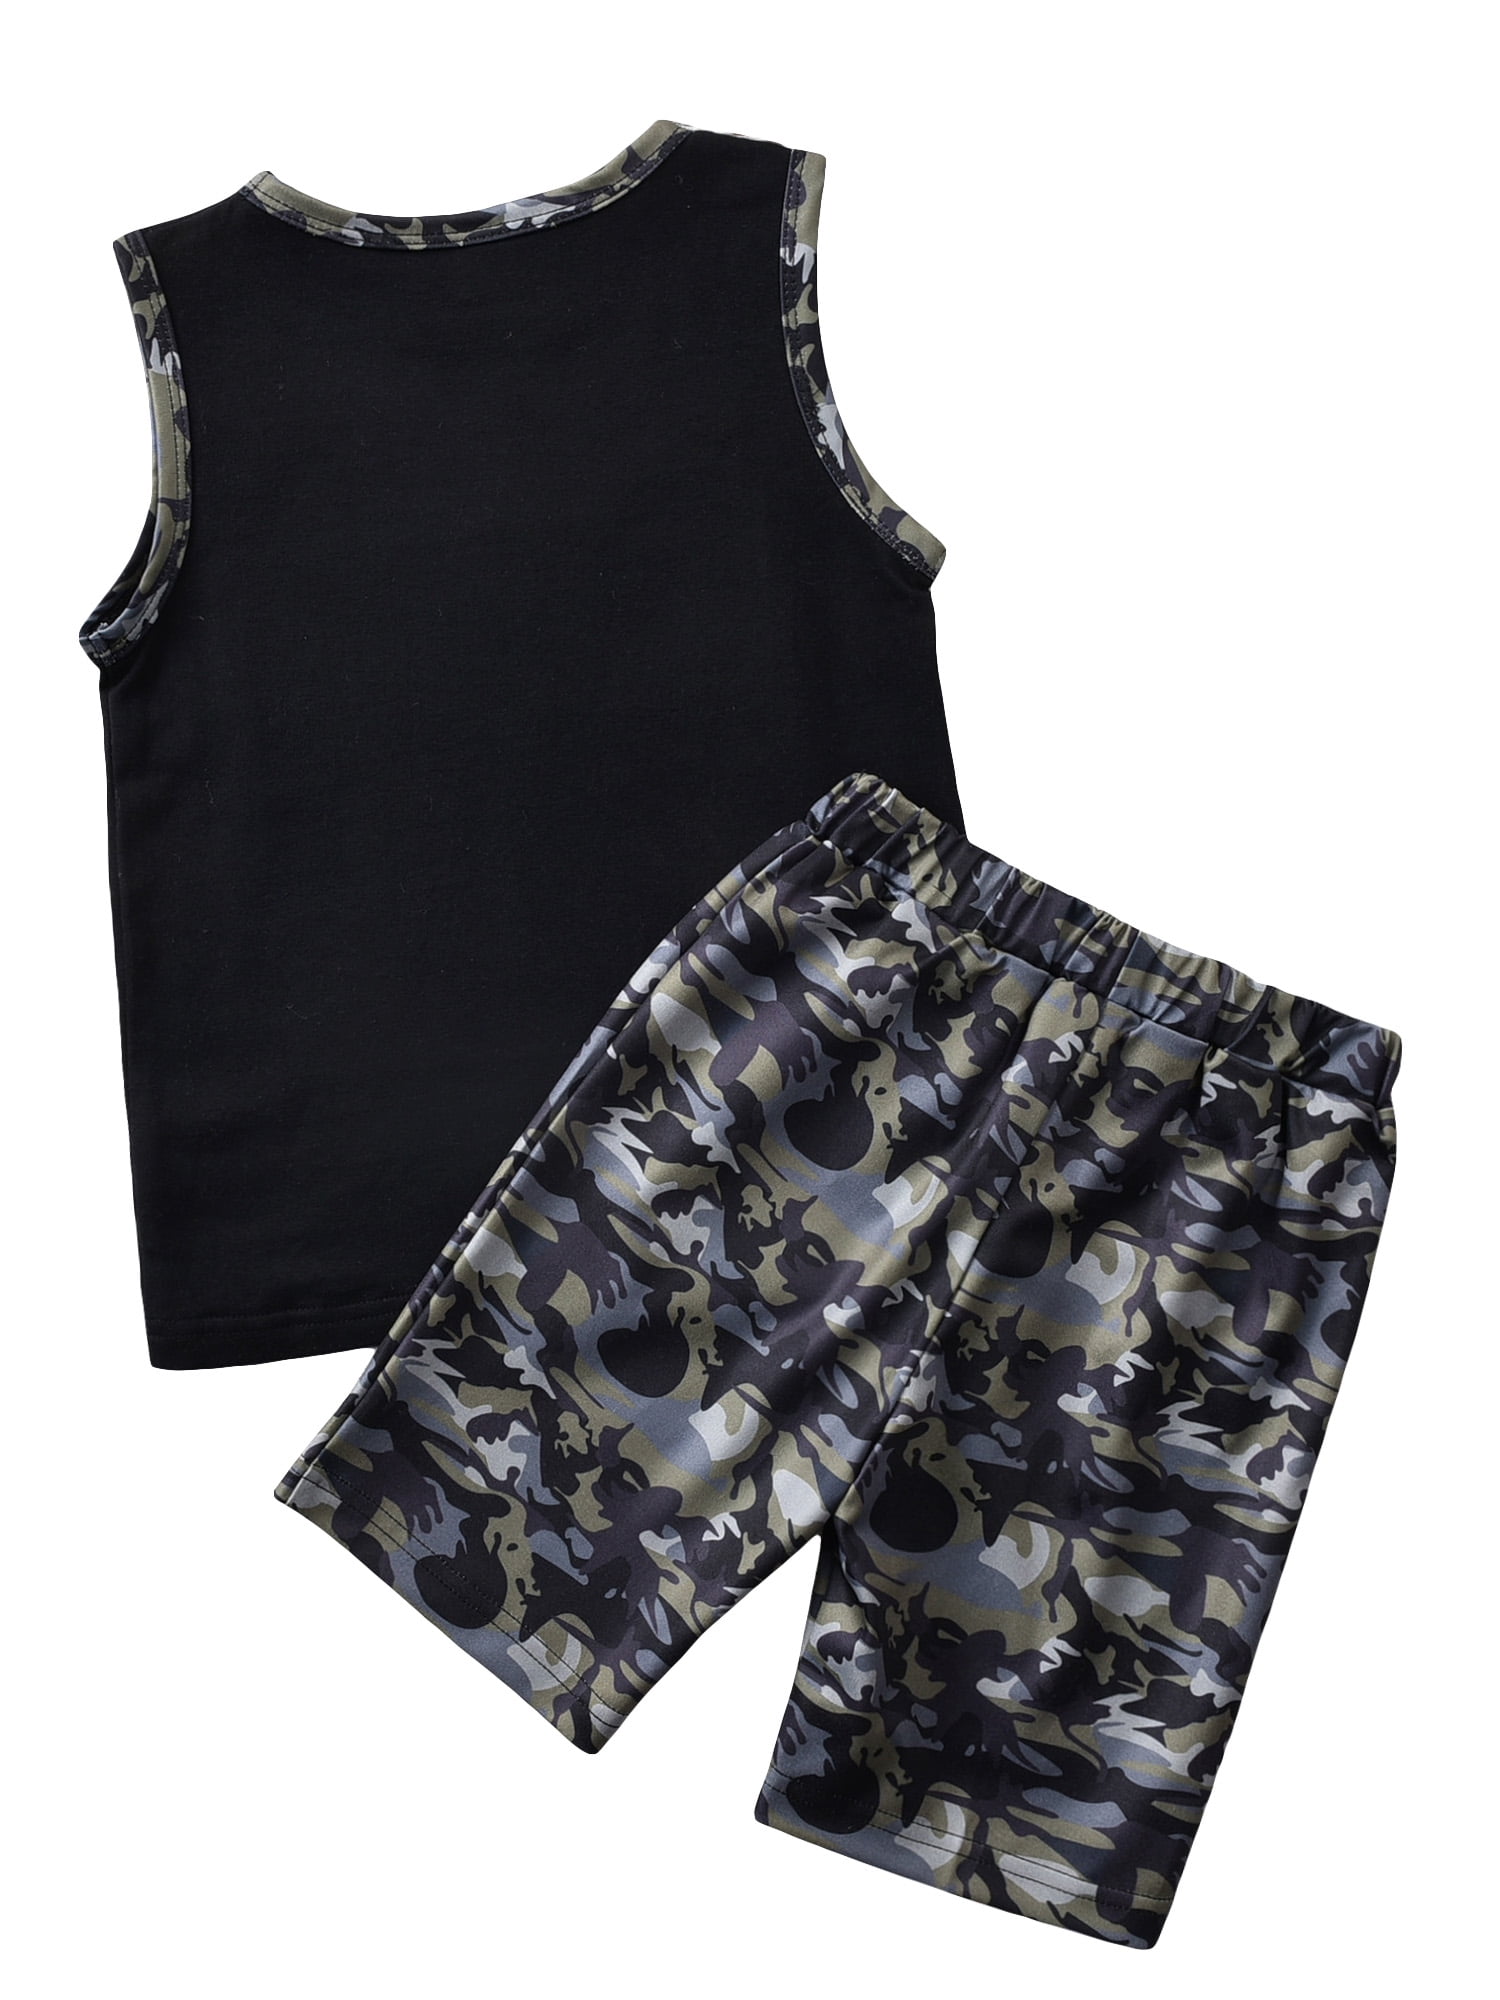 Toddler Infant Baby Boy Summer Clothes Tank Top Camouflage Shorts Outfit Set 